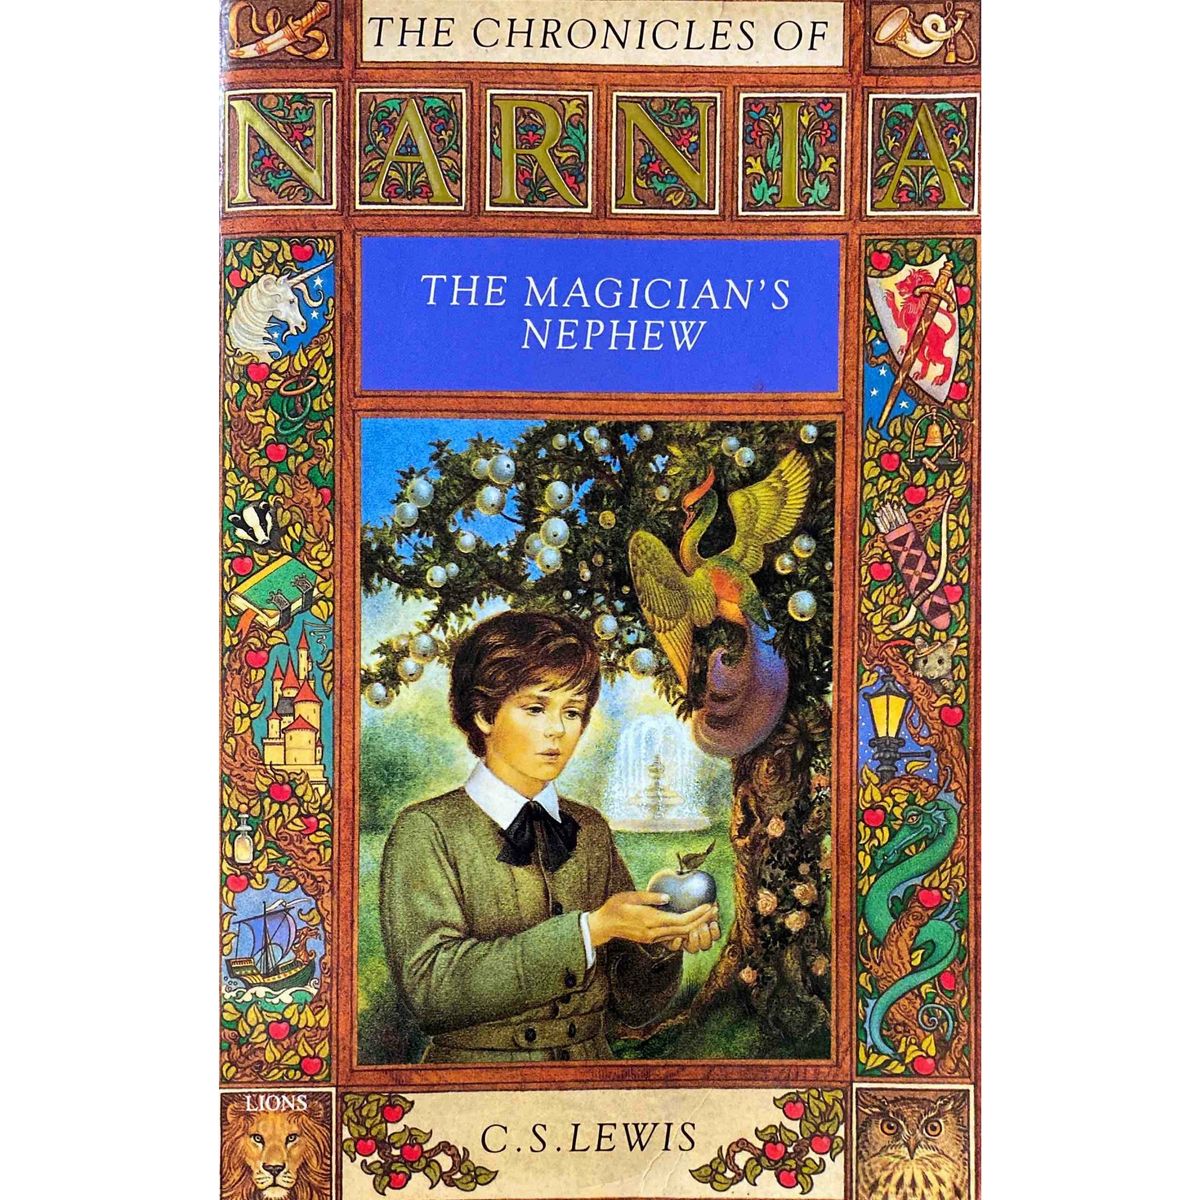 ISBN: 9780006740346 / 0006740340 - The Magician's Nephew by C.S. Lewis [1990]